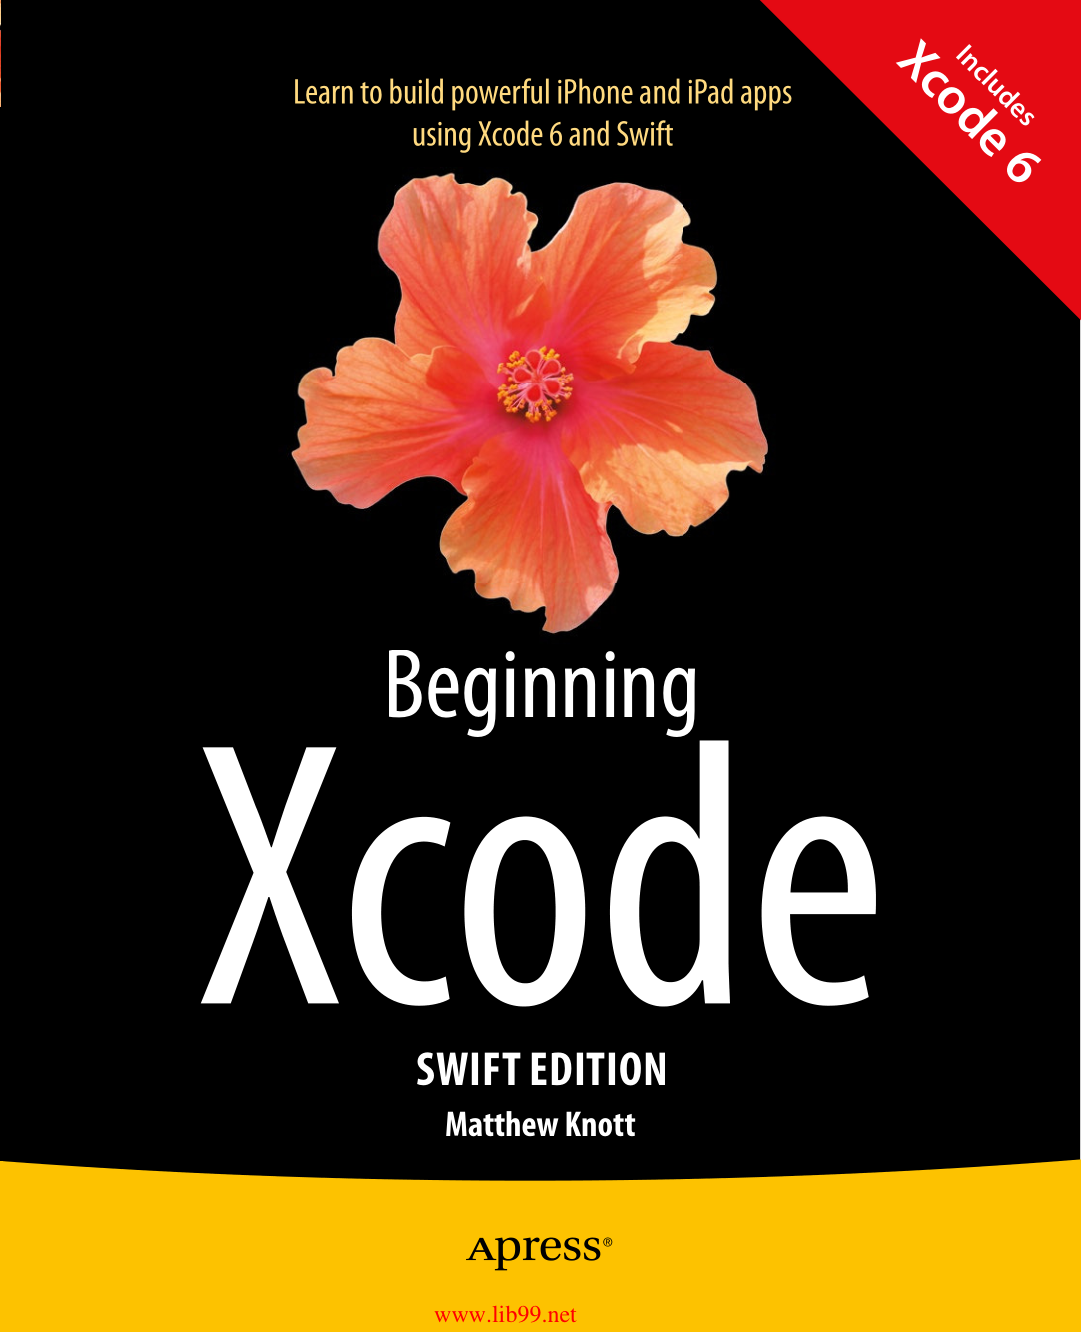 Beginning Xcode Swift Edition.png